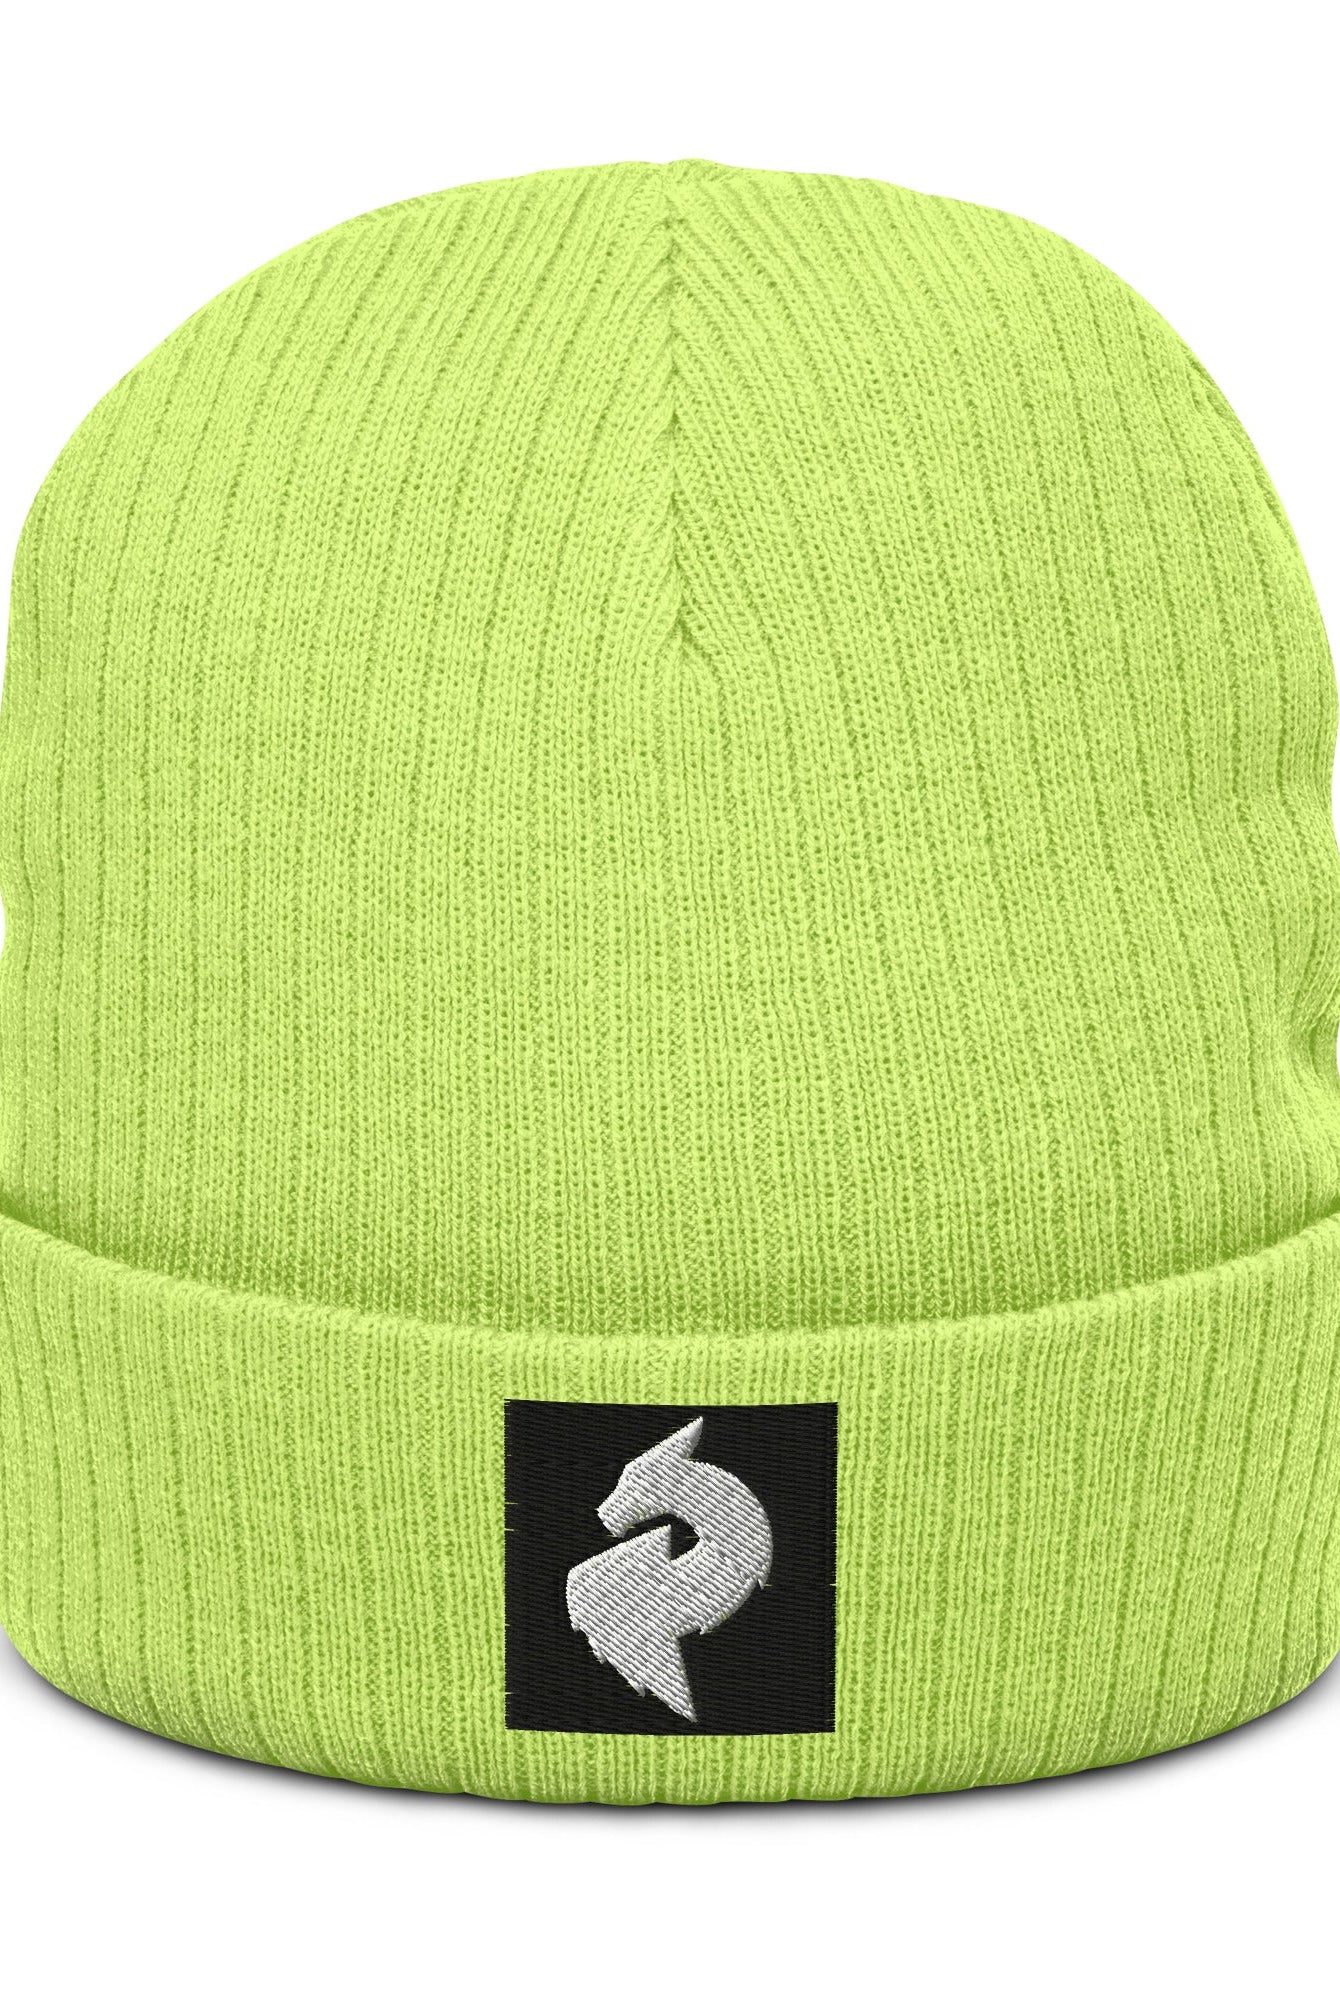 His or Hers Dragon Foxx™ Eco - Ribbed knit beanie - His or Hers Dragon Foxx™ Eco - Ribbed knit beanie - DRAGON FOXX™ - His or Hers Dragon Foxx™ Eco - Ribbed knit beanie - 2867494_15020 - Acid Green - - Accessories - Acid Green Eco - Ribbed knit beanie - Beanie